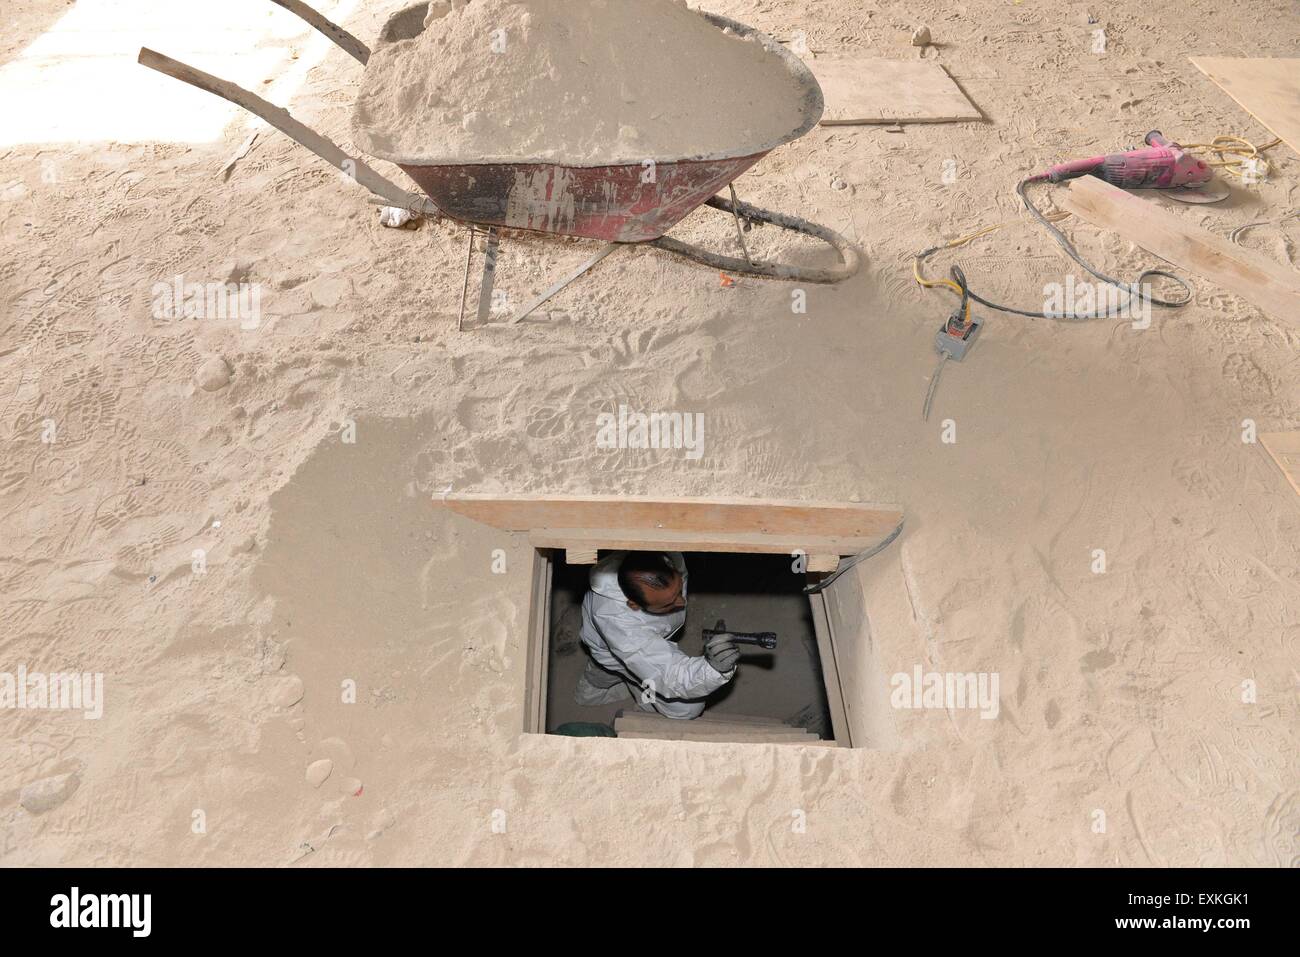 Almoloya De Juarez, Mexico. 14th July, 2015. A specialist inspects the tunnel where Mexico's drug kingpin Joaquin 'El Chapo' Guzman escaped through, in Almoloya de Juarez, Mexico, on July 14, 2015. Mexican drug lord Joaquin 'El Chapo' Guzman could not have escaped from prison without inside help, Interior Minister Miguel Angel Osorio Chong said on Monday, pledging to bring to justice all those involved in the brazen scheme. Credit:  Mario V¨¢zquez/MVT/Xinhua/Alamy Live News Stock Photo